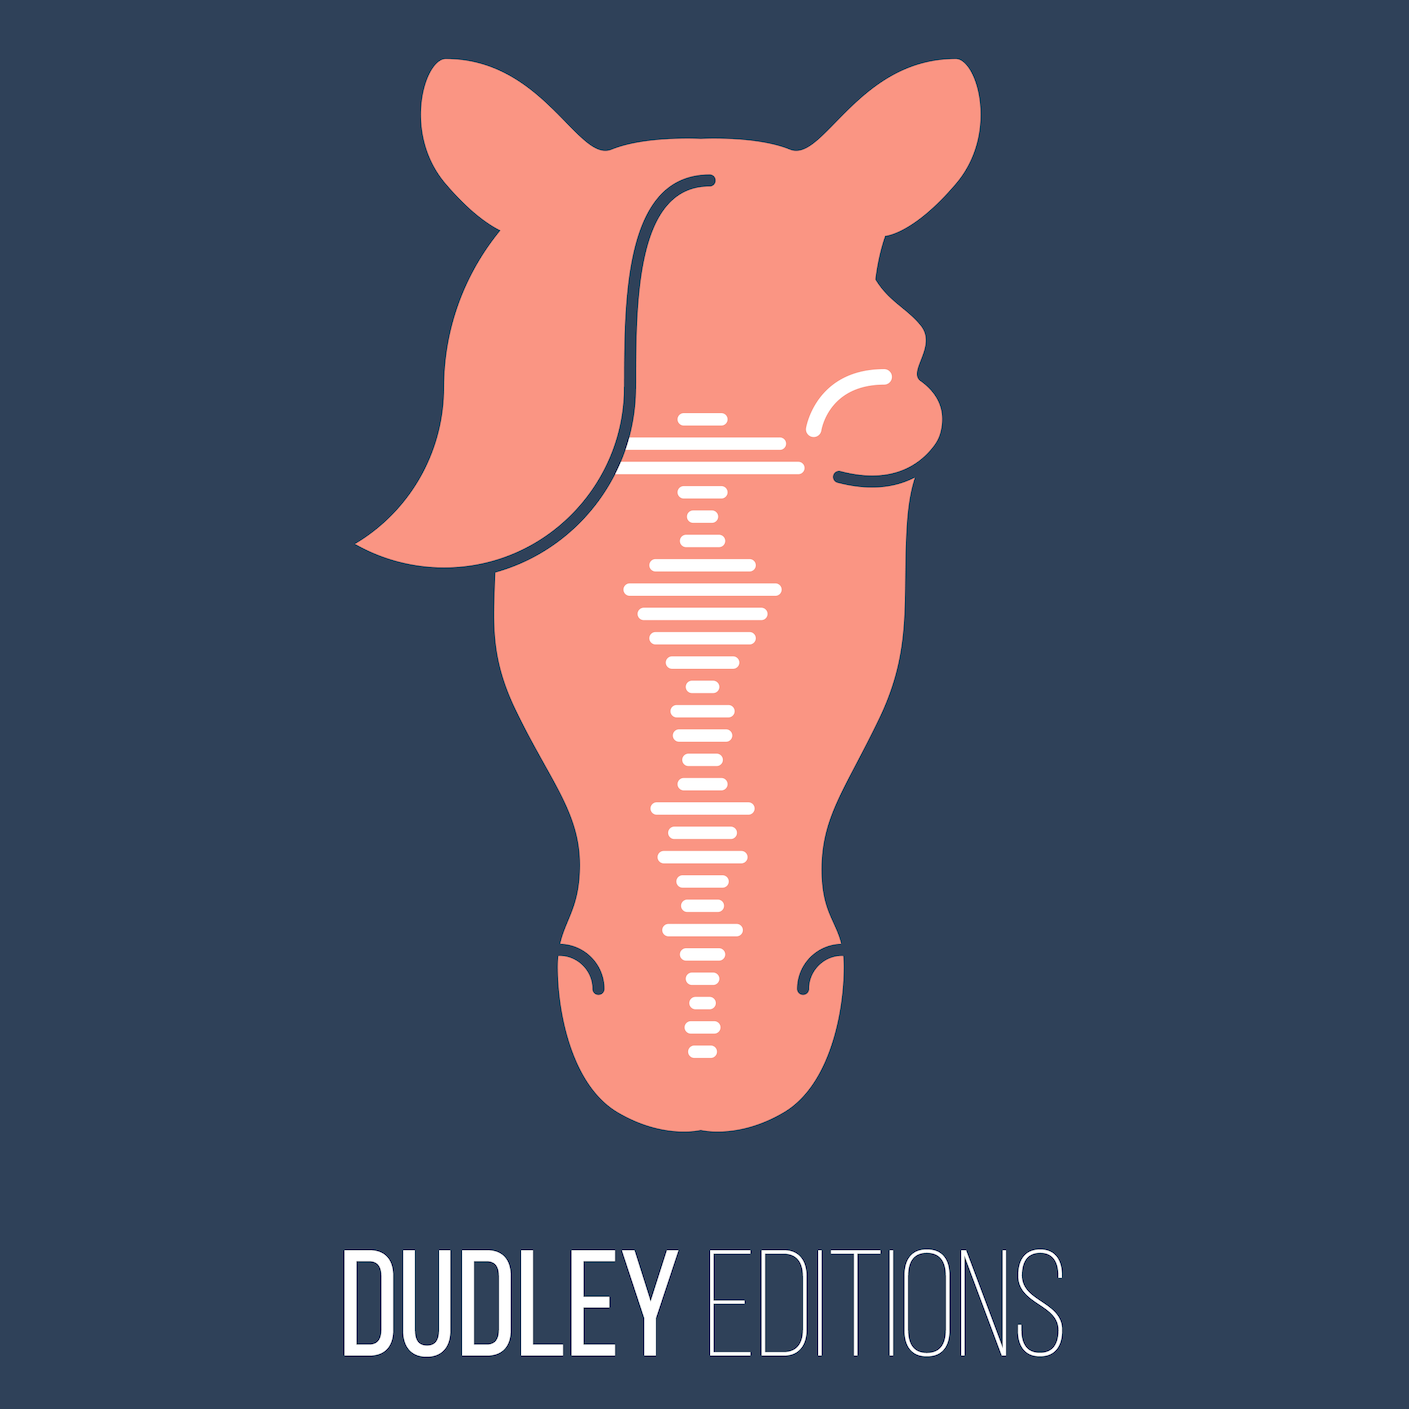 Dudley Editions logo